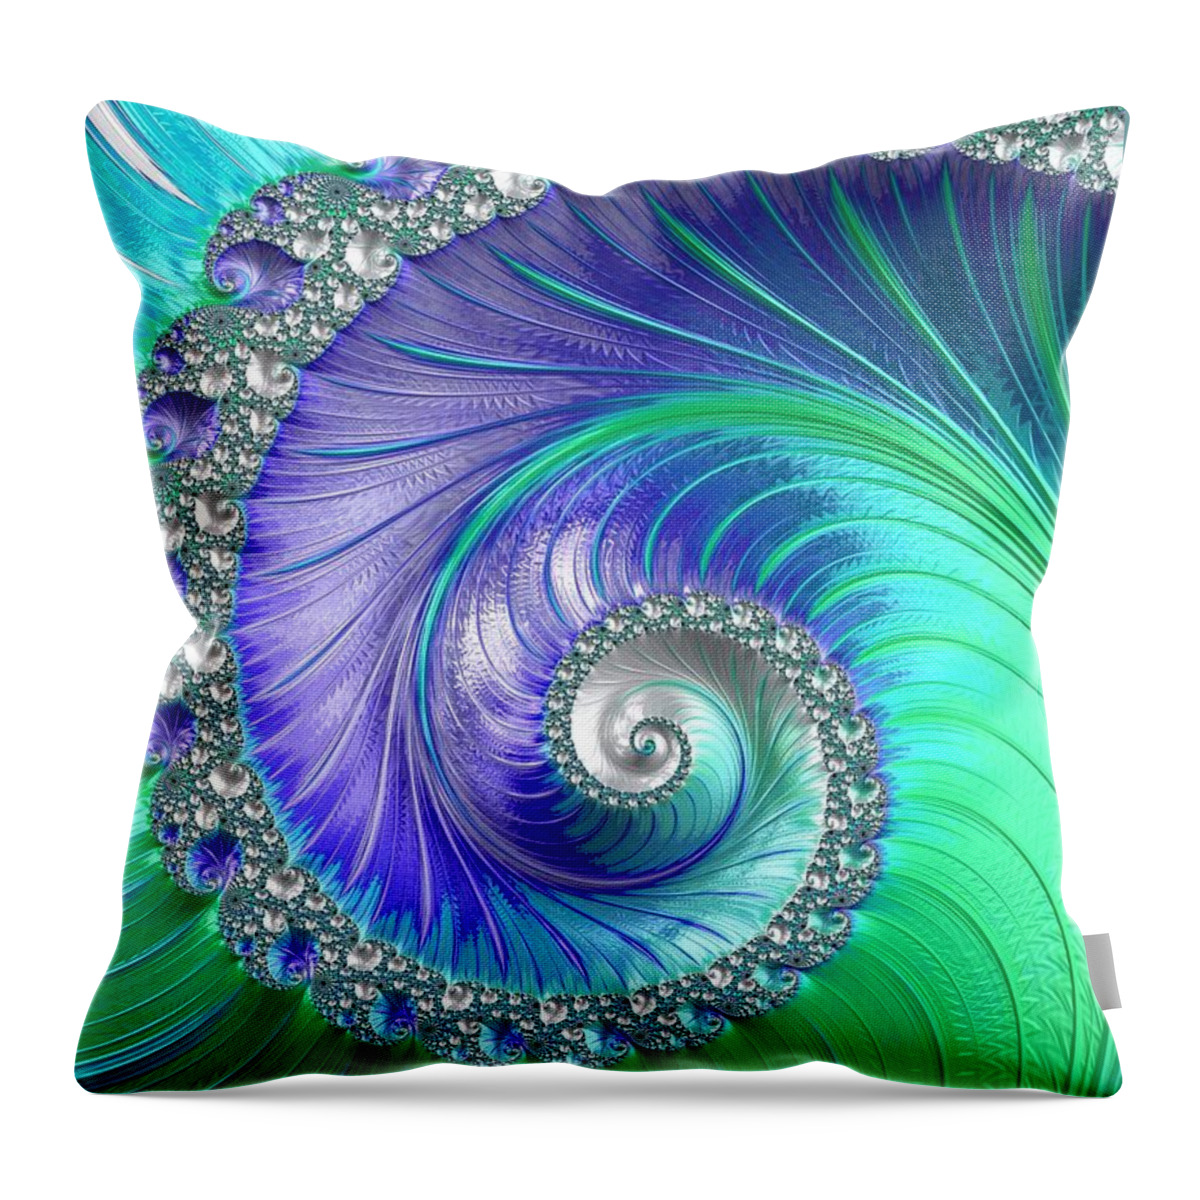 Fractal Throw Pillow featuring the digital art Inspired by Nature Fractal Spiral by Mo Barton